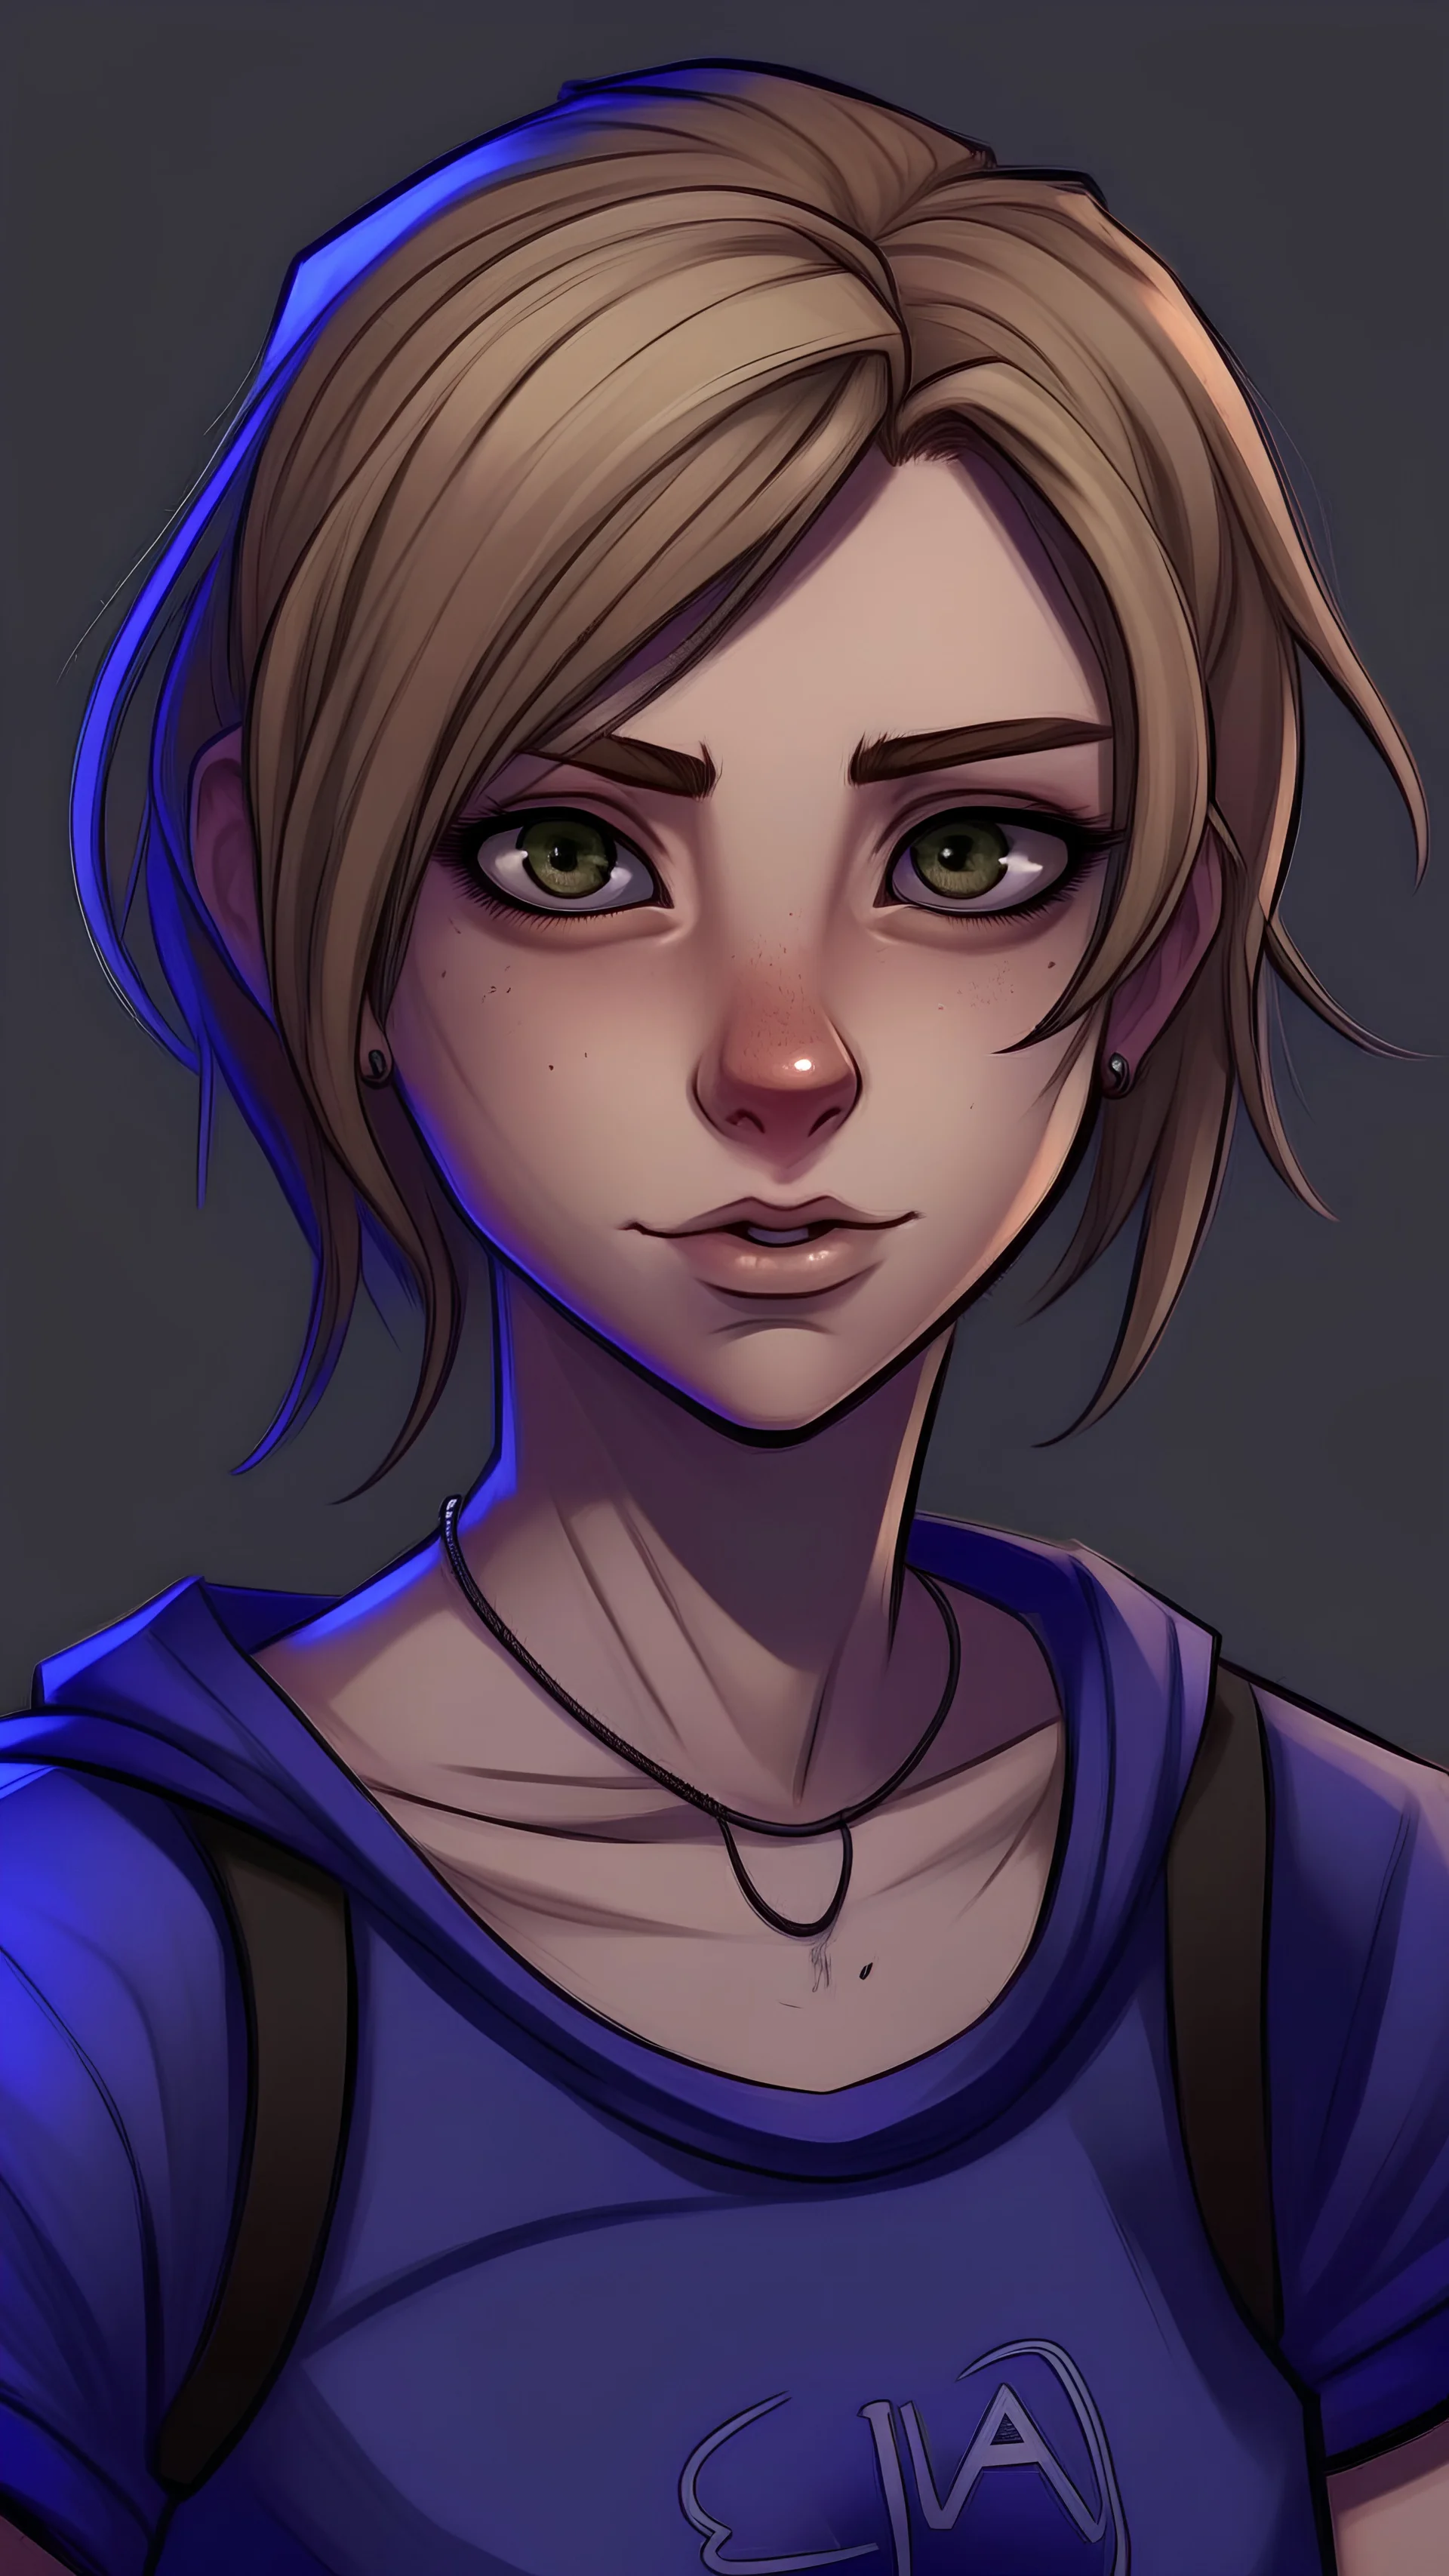 Realistic anime art style. Her eyes are marked with black eyeliner. Her lips are painted with matte black lipstick. She has olive skin and blue eyes, and her ear-length dirty blonde hair is drawn back in a ponytail. She is wearing a casual purple t-shirt, baggy blue jeans, and navy blue sneakers